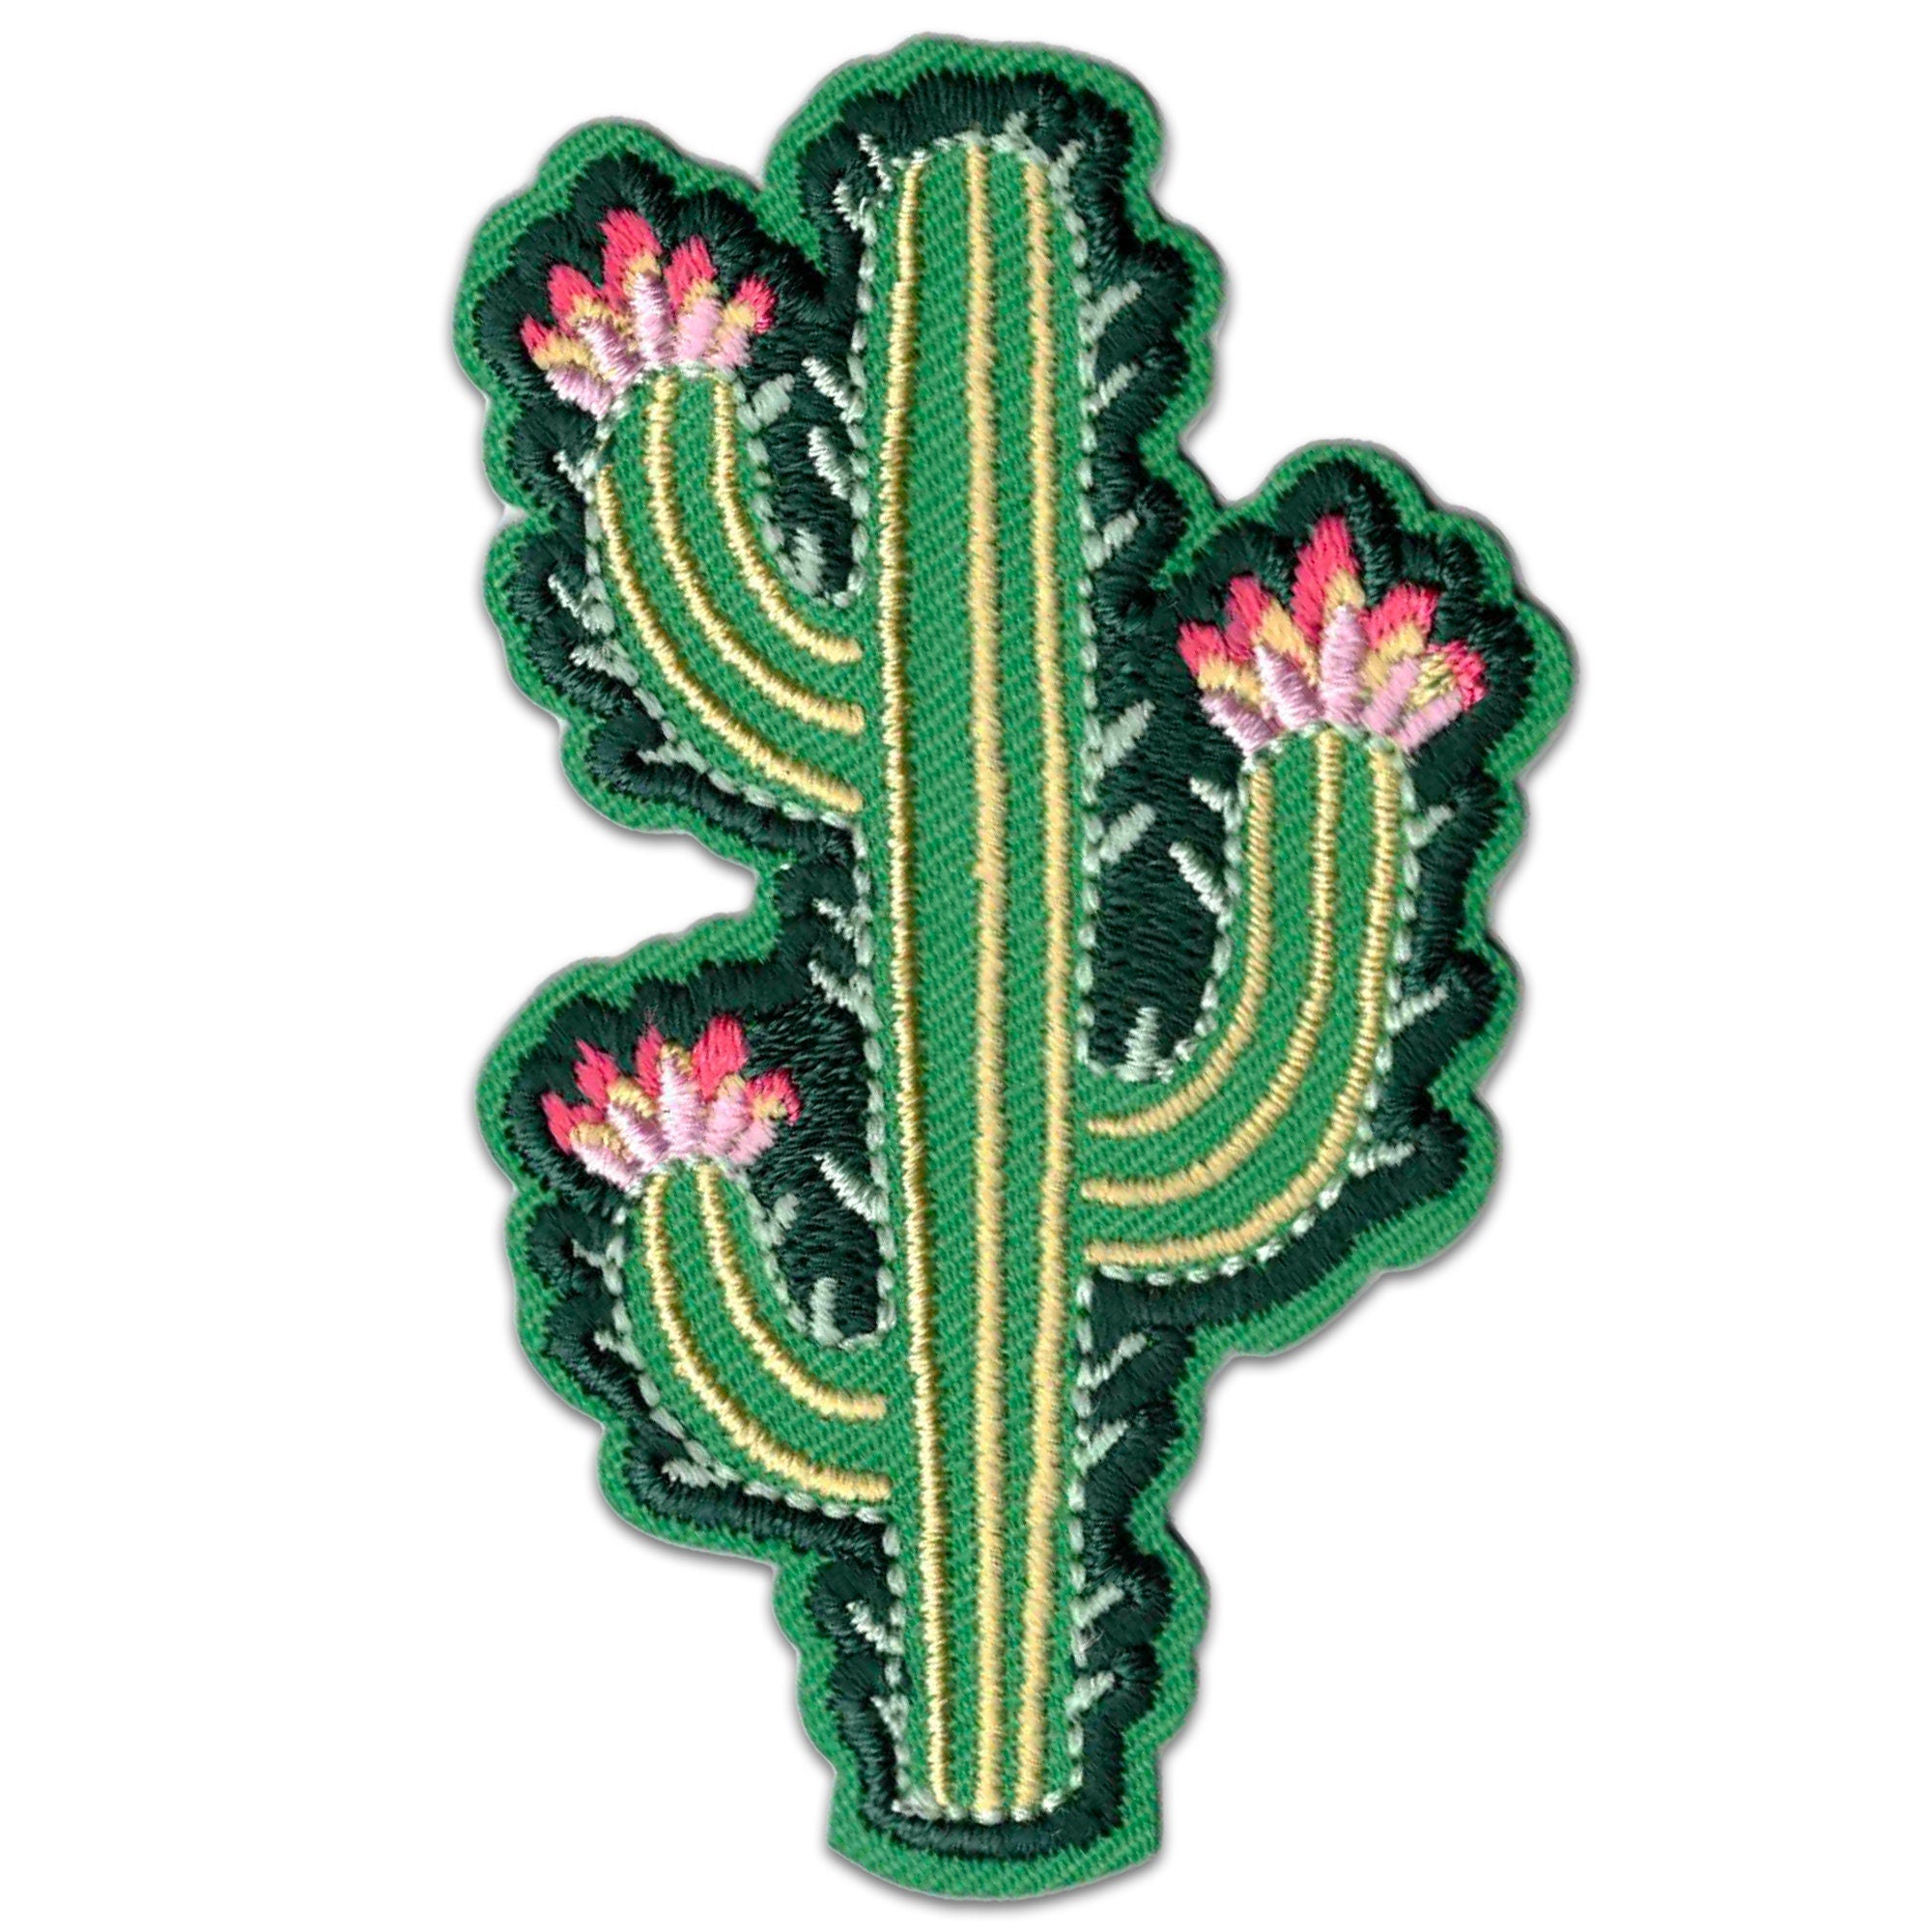 Black Cactus Iron on Patch, Size: 2 Wide x 3.5 Tall